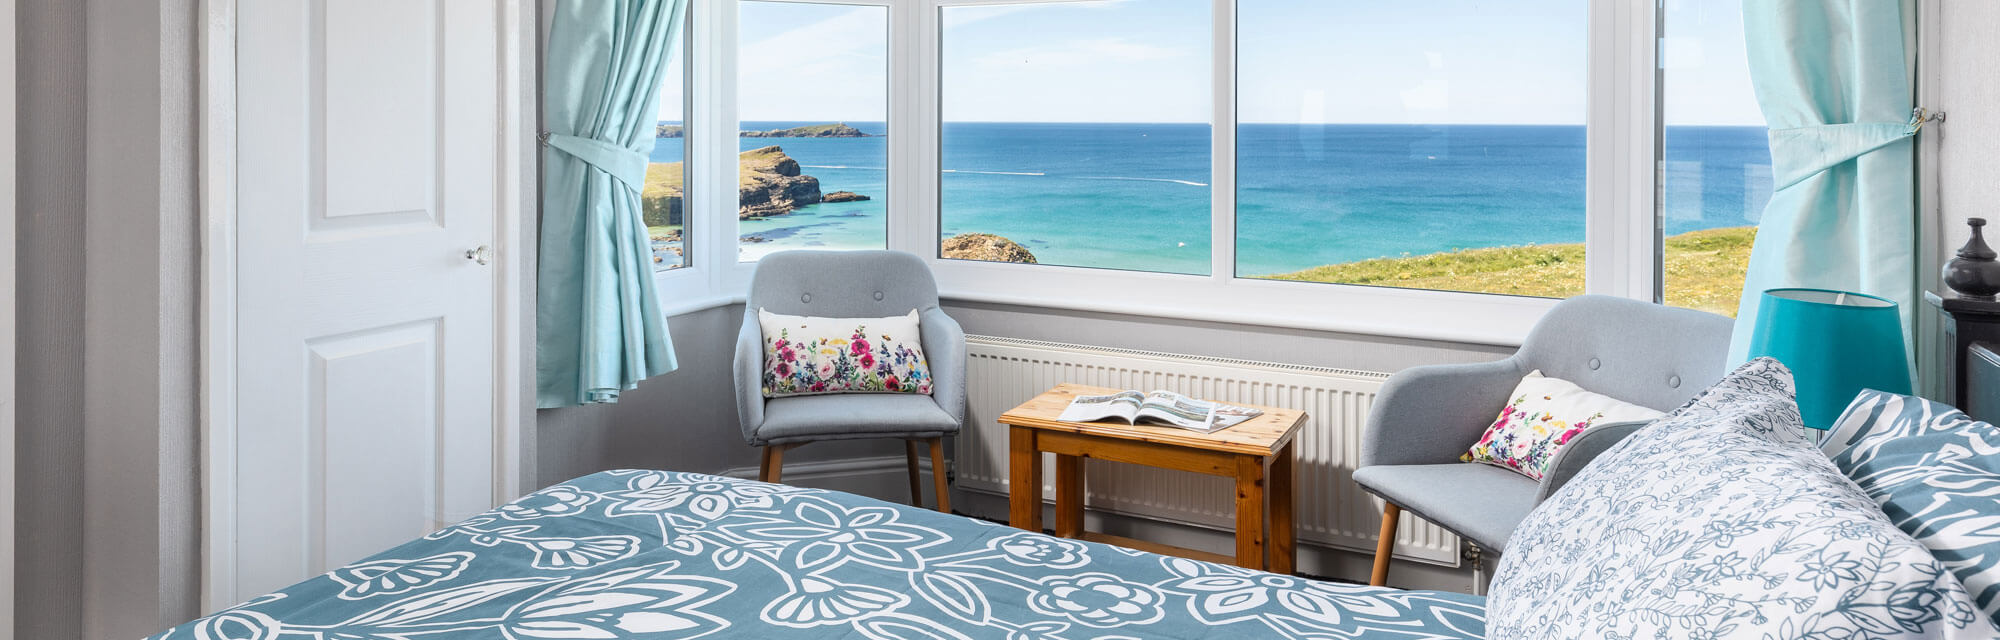 Room interior with sea view